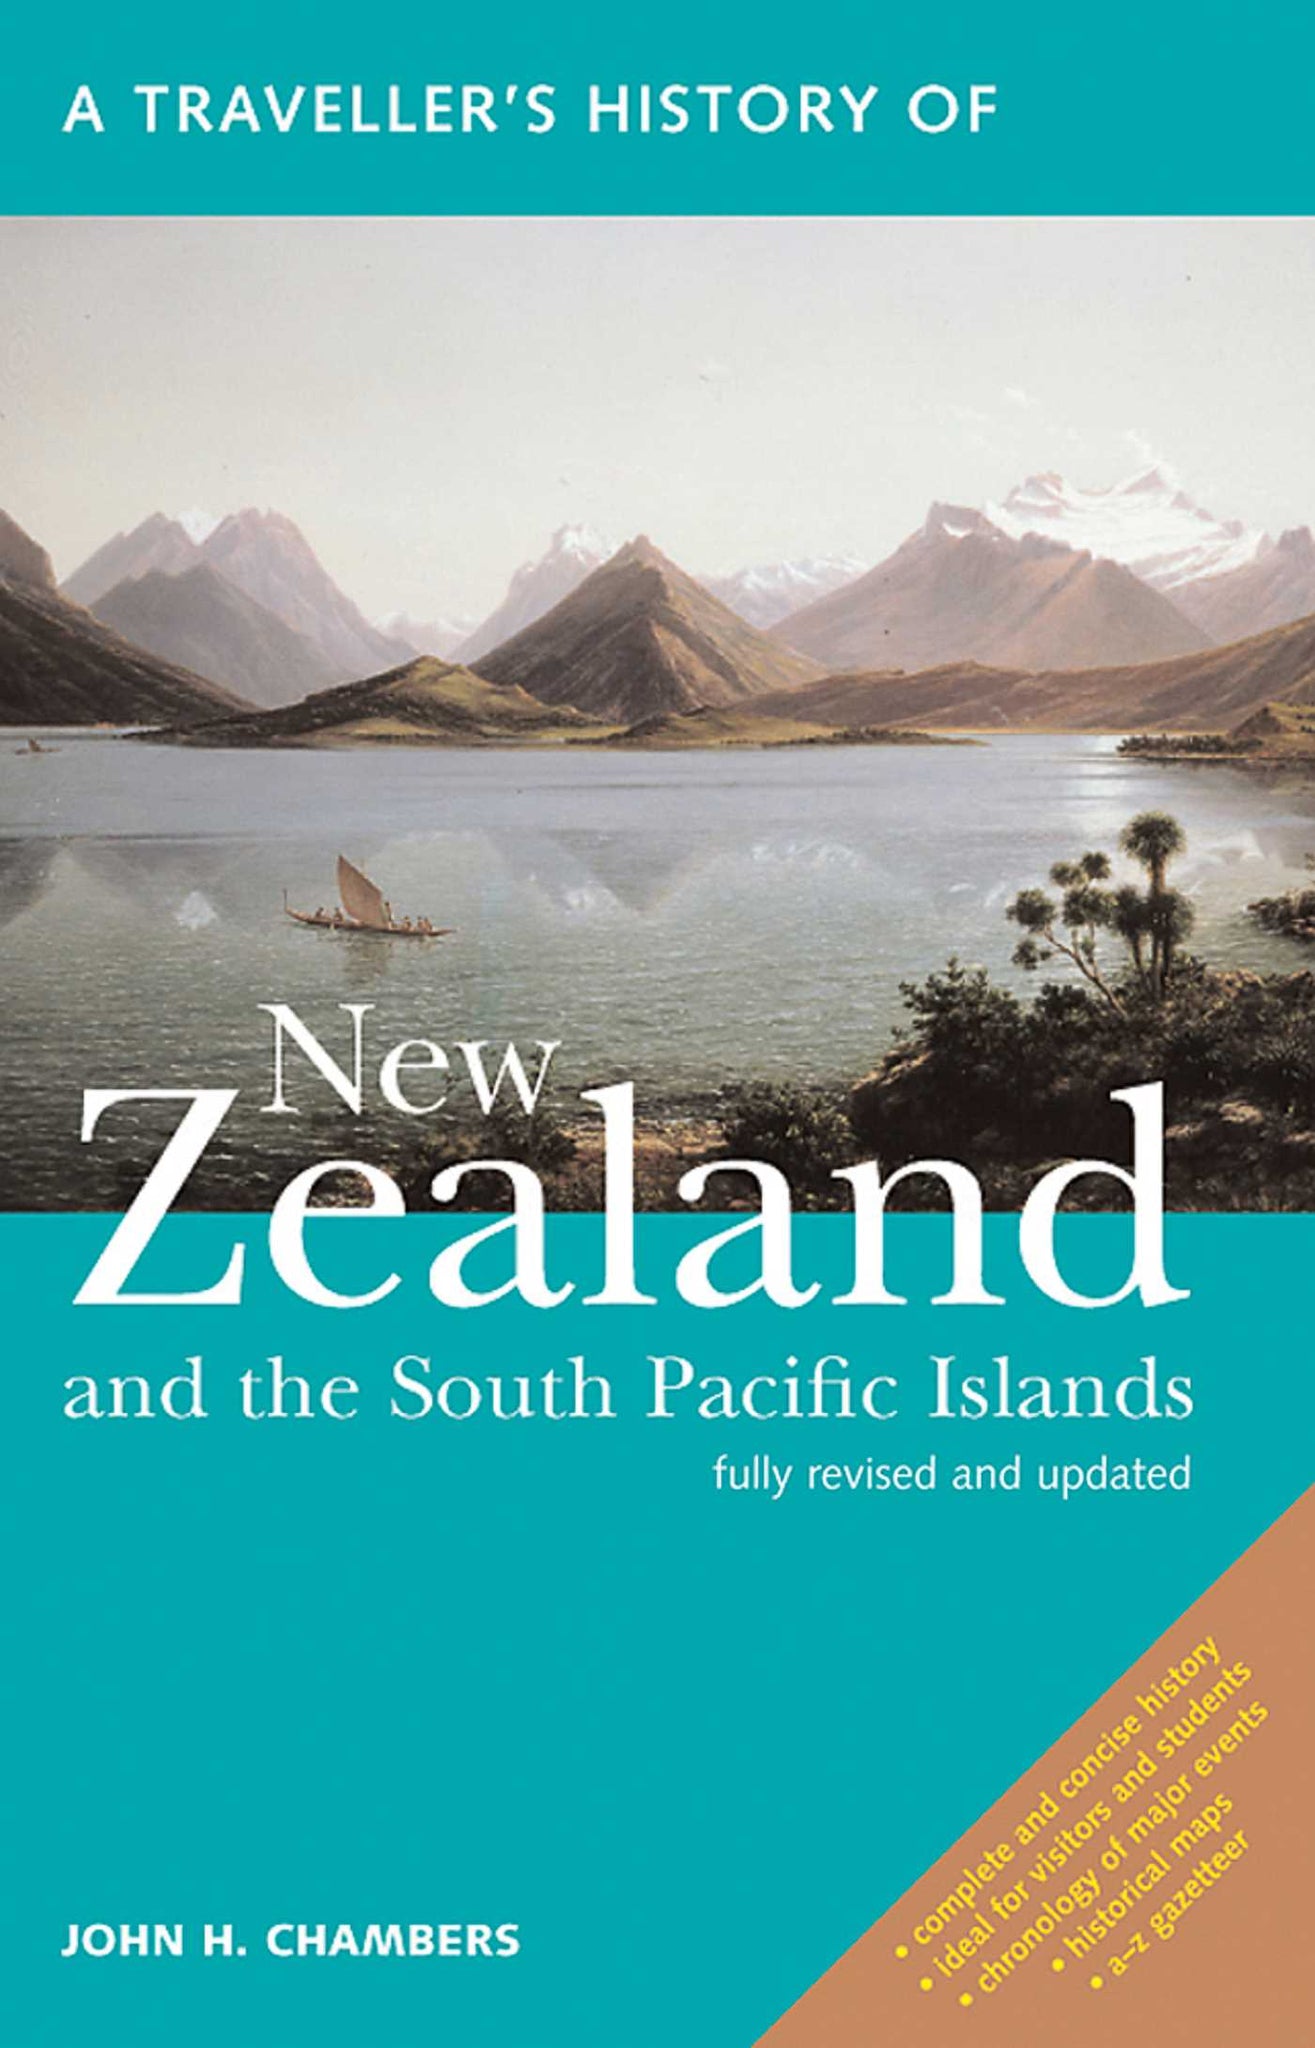 A Traveller's History of New Zealand